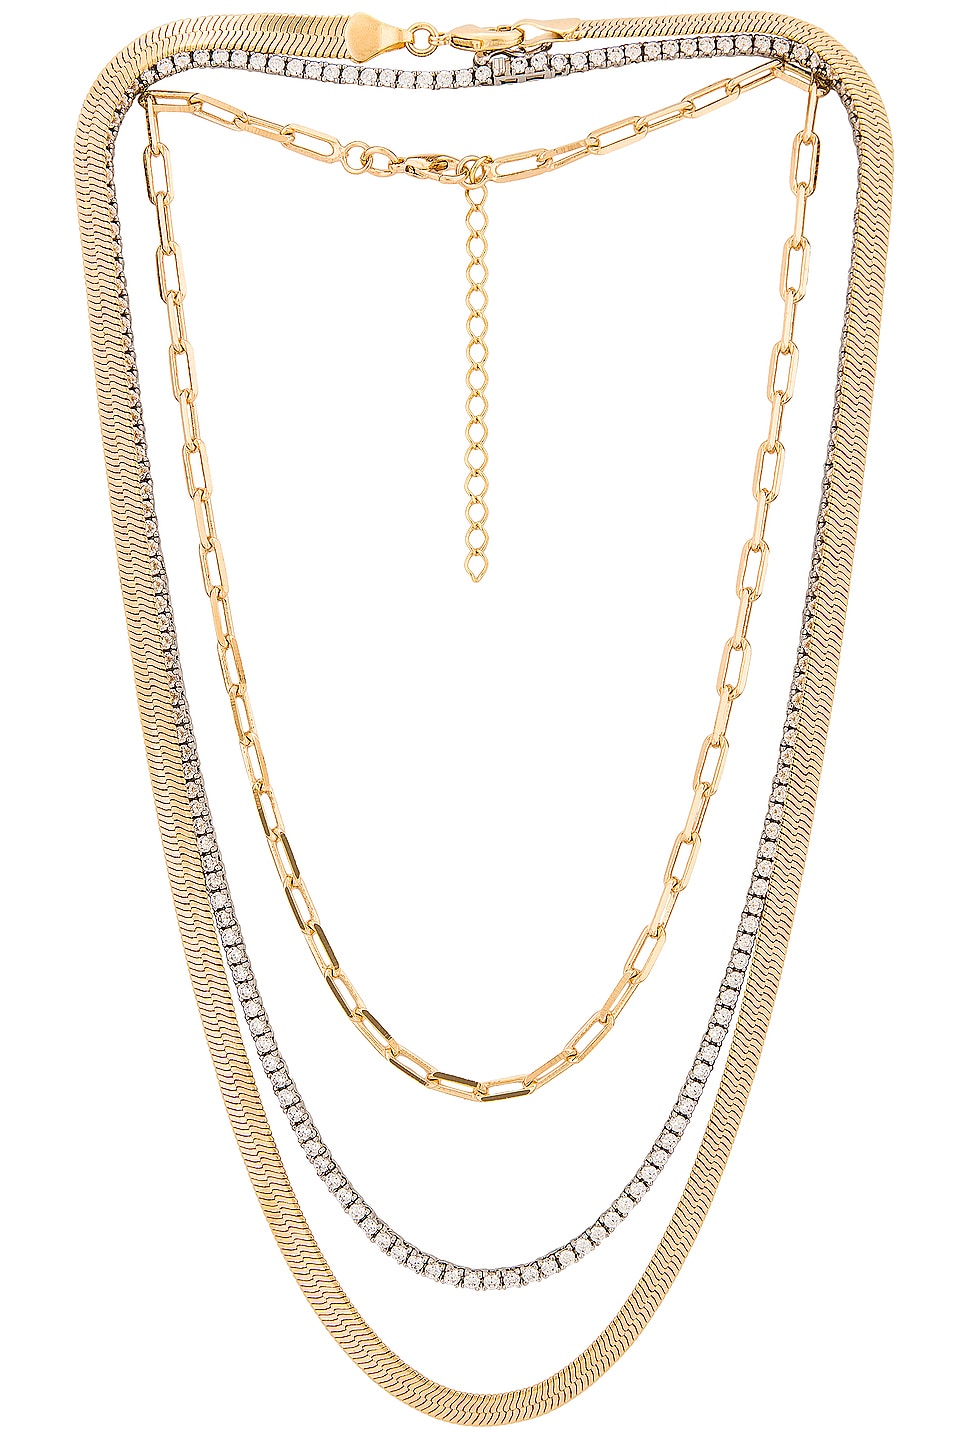 Image 1 of Jordan Road Jewelry Le Brunch Necklace Stack in Gold